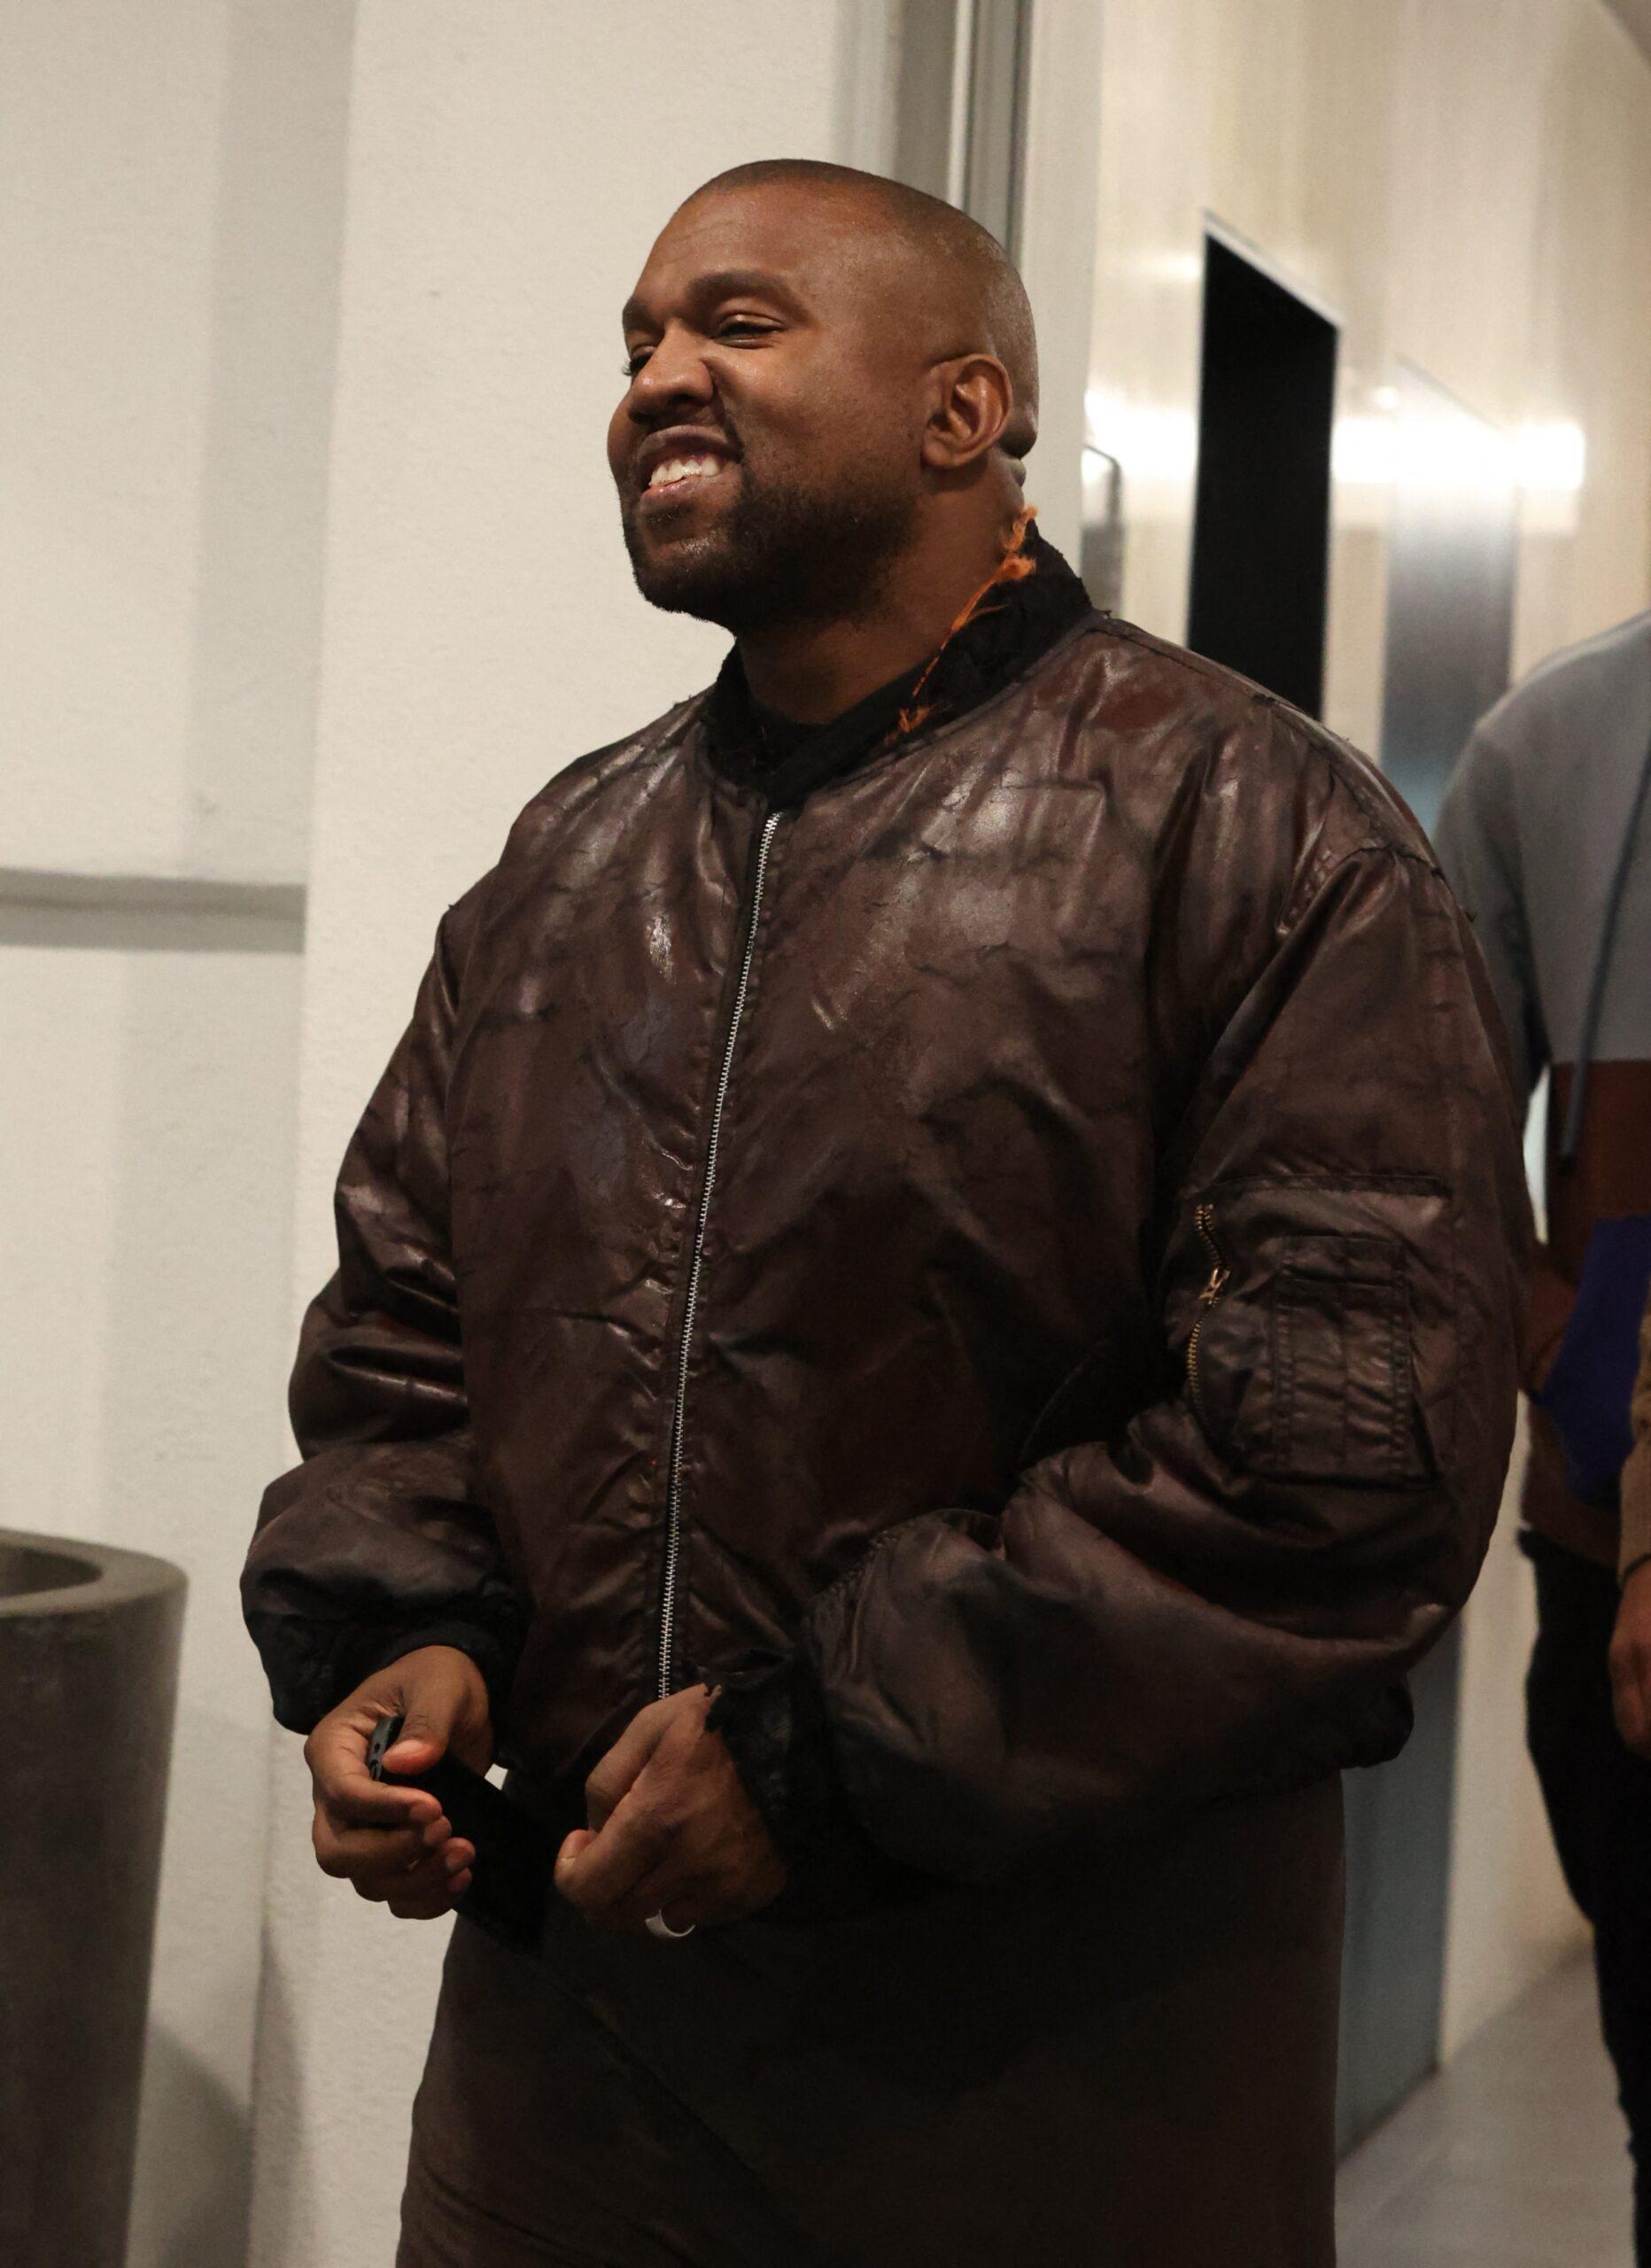 Kanye smiles brightly after dining with friends at e.baldi restaurant.